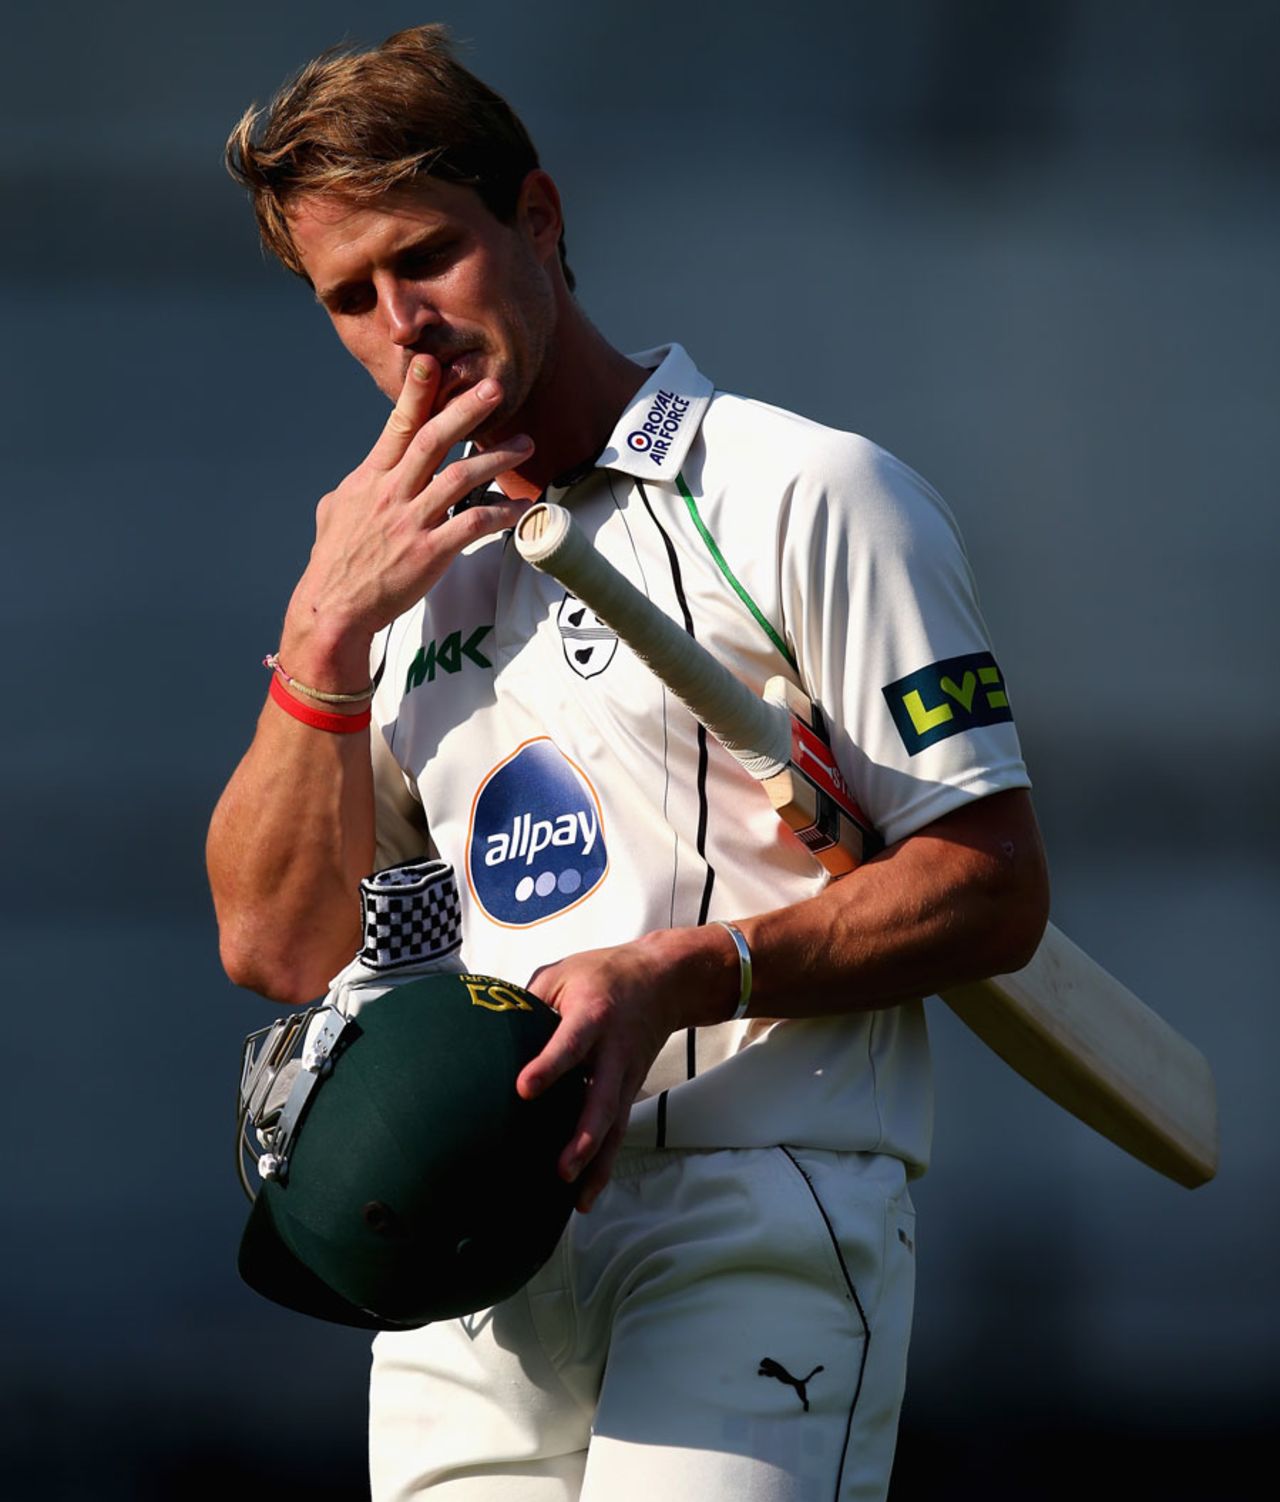 Nick Compton in a contemplative mood after his dismissal, Worcestershire v Australians, Tour match, New Road, 3rd day, July 4, 2013